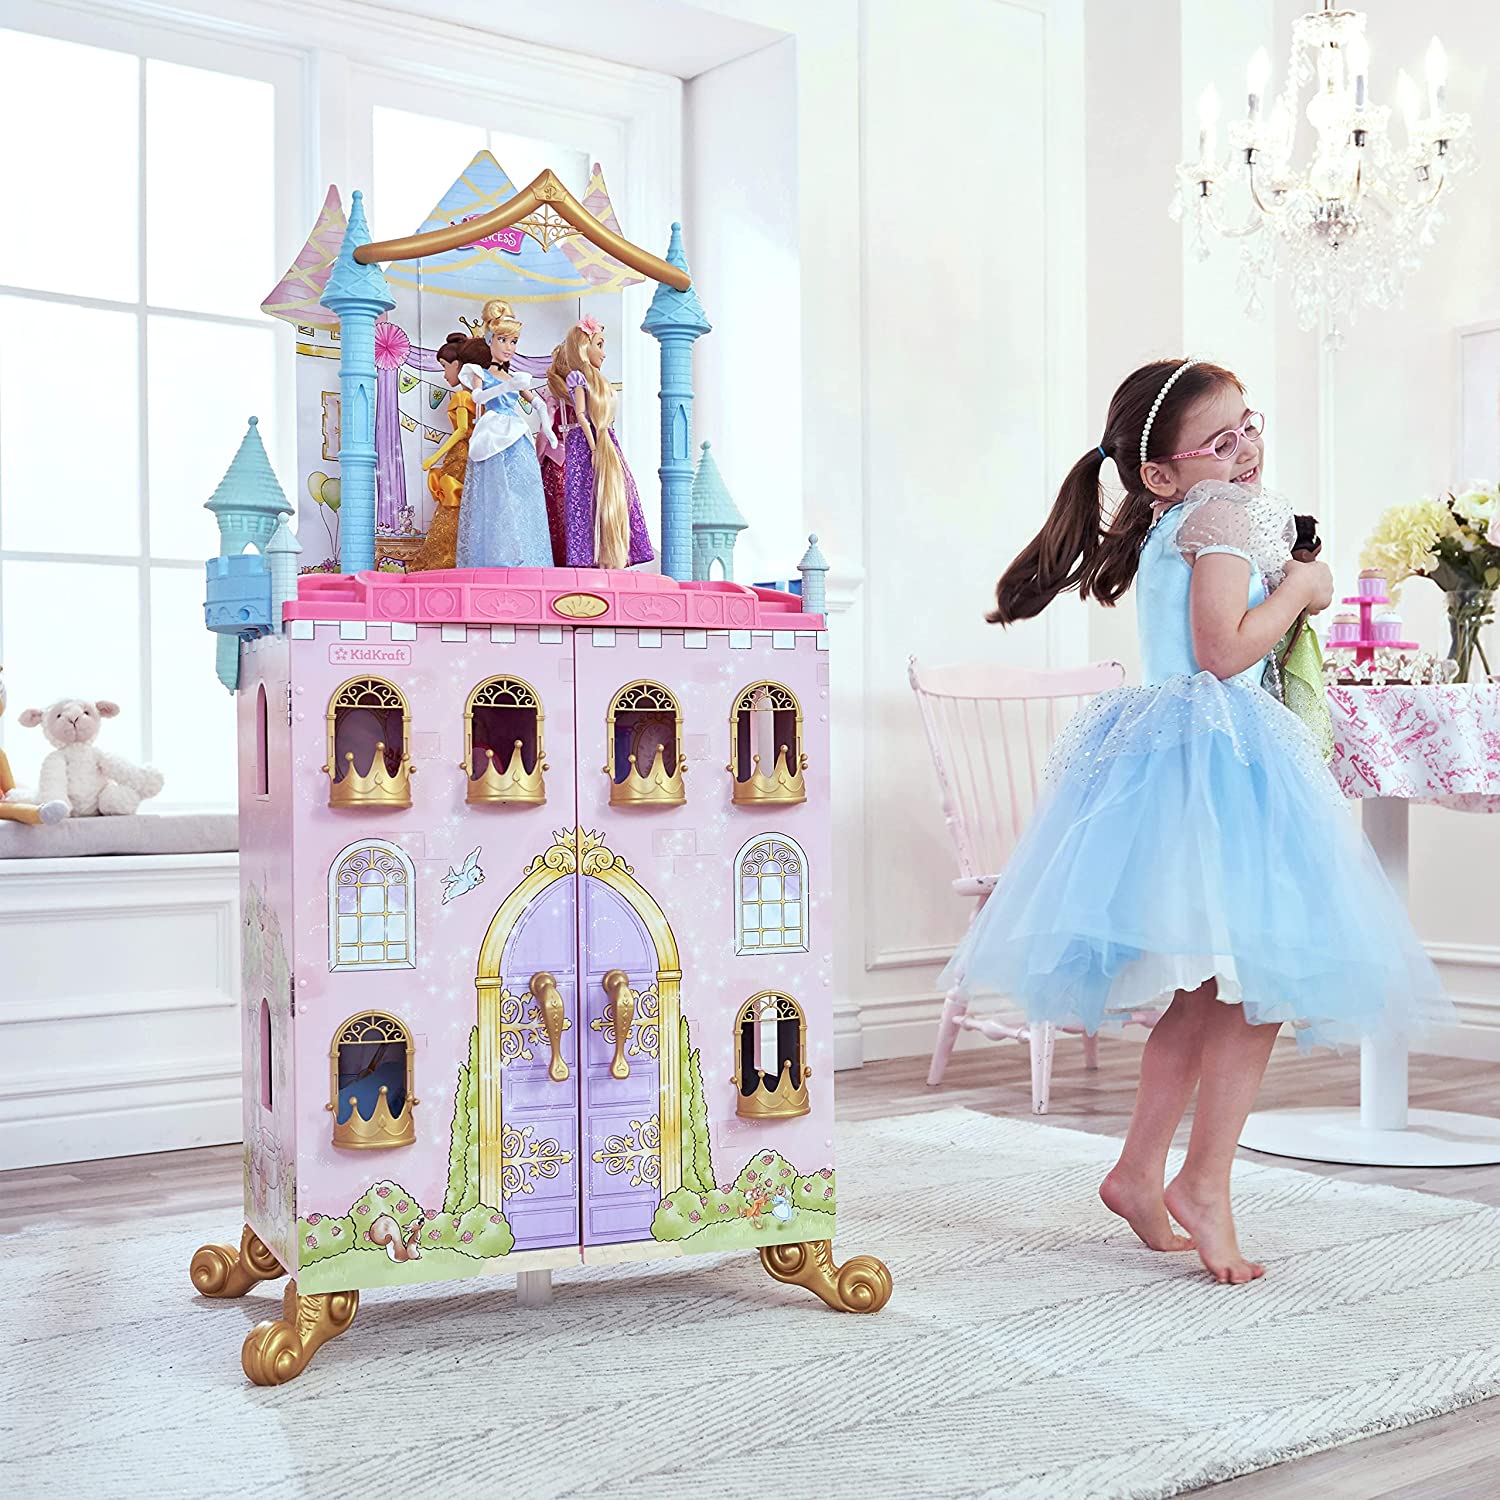 https://bigbigmart.com/wp-content/uploads/2023/05/KidKraft-Disney-Princess-Dance-Dream-Wooden-Dollhouse-Over-4-Feet-Tall-with-Sounds-Spinning-Dance-Floor-and-20-Play-Pieces-Gift-for-Ages-3-Pink6.jpg